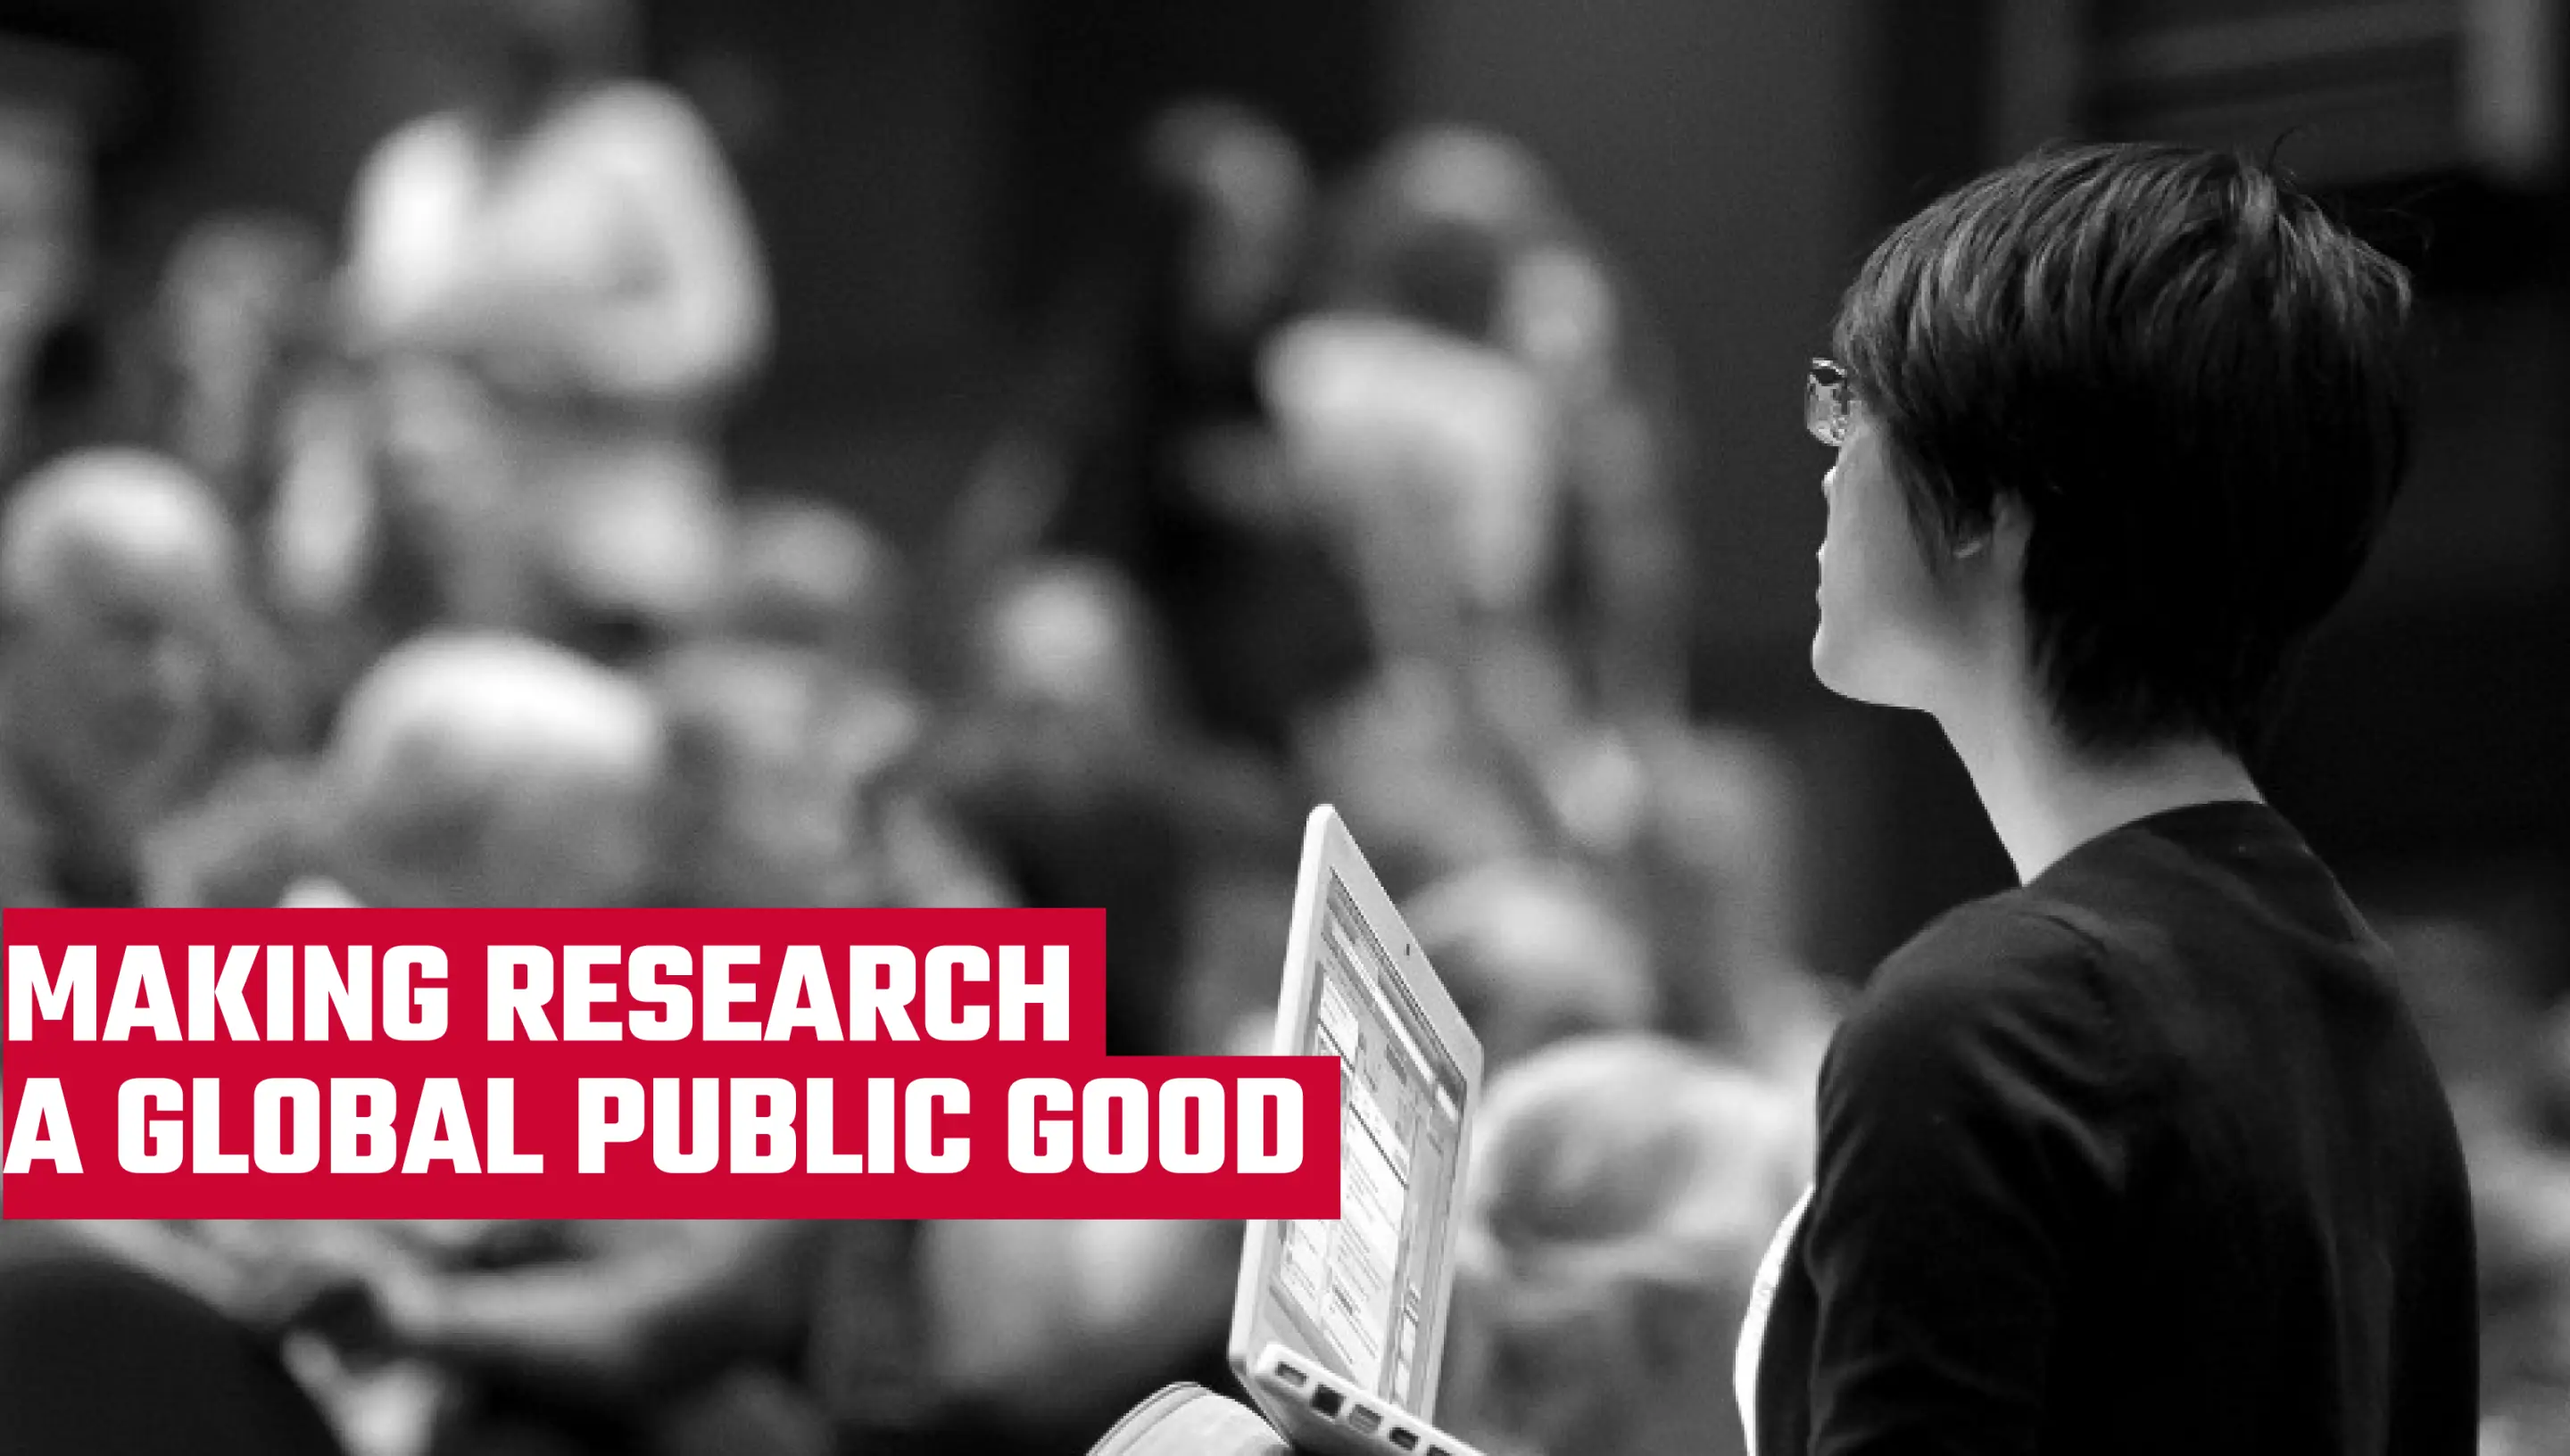 a woman is giving a lecture to a crowd, and there are words written on the picture that say "making research a global public good"